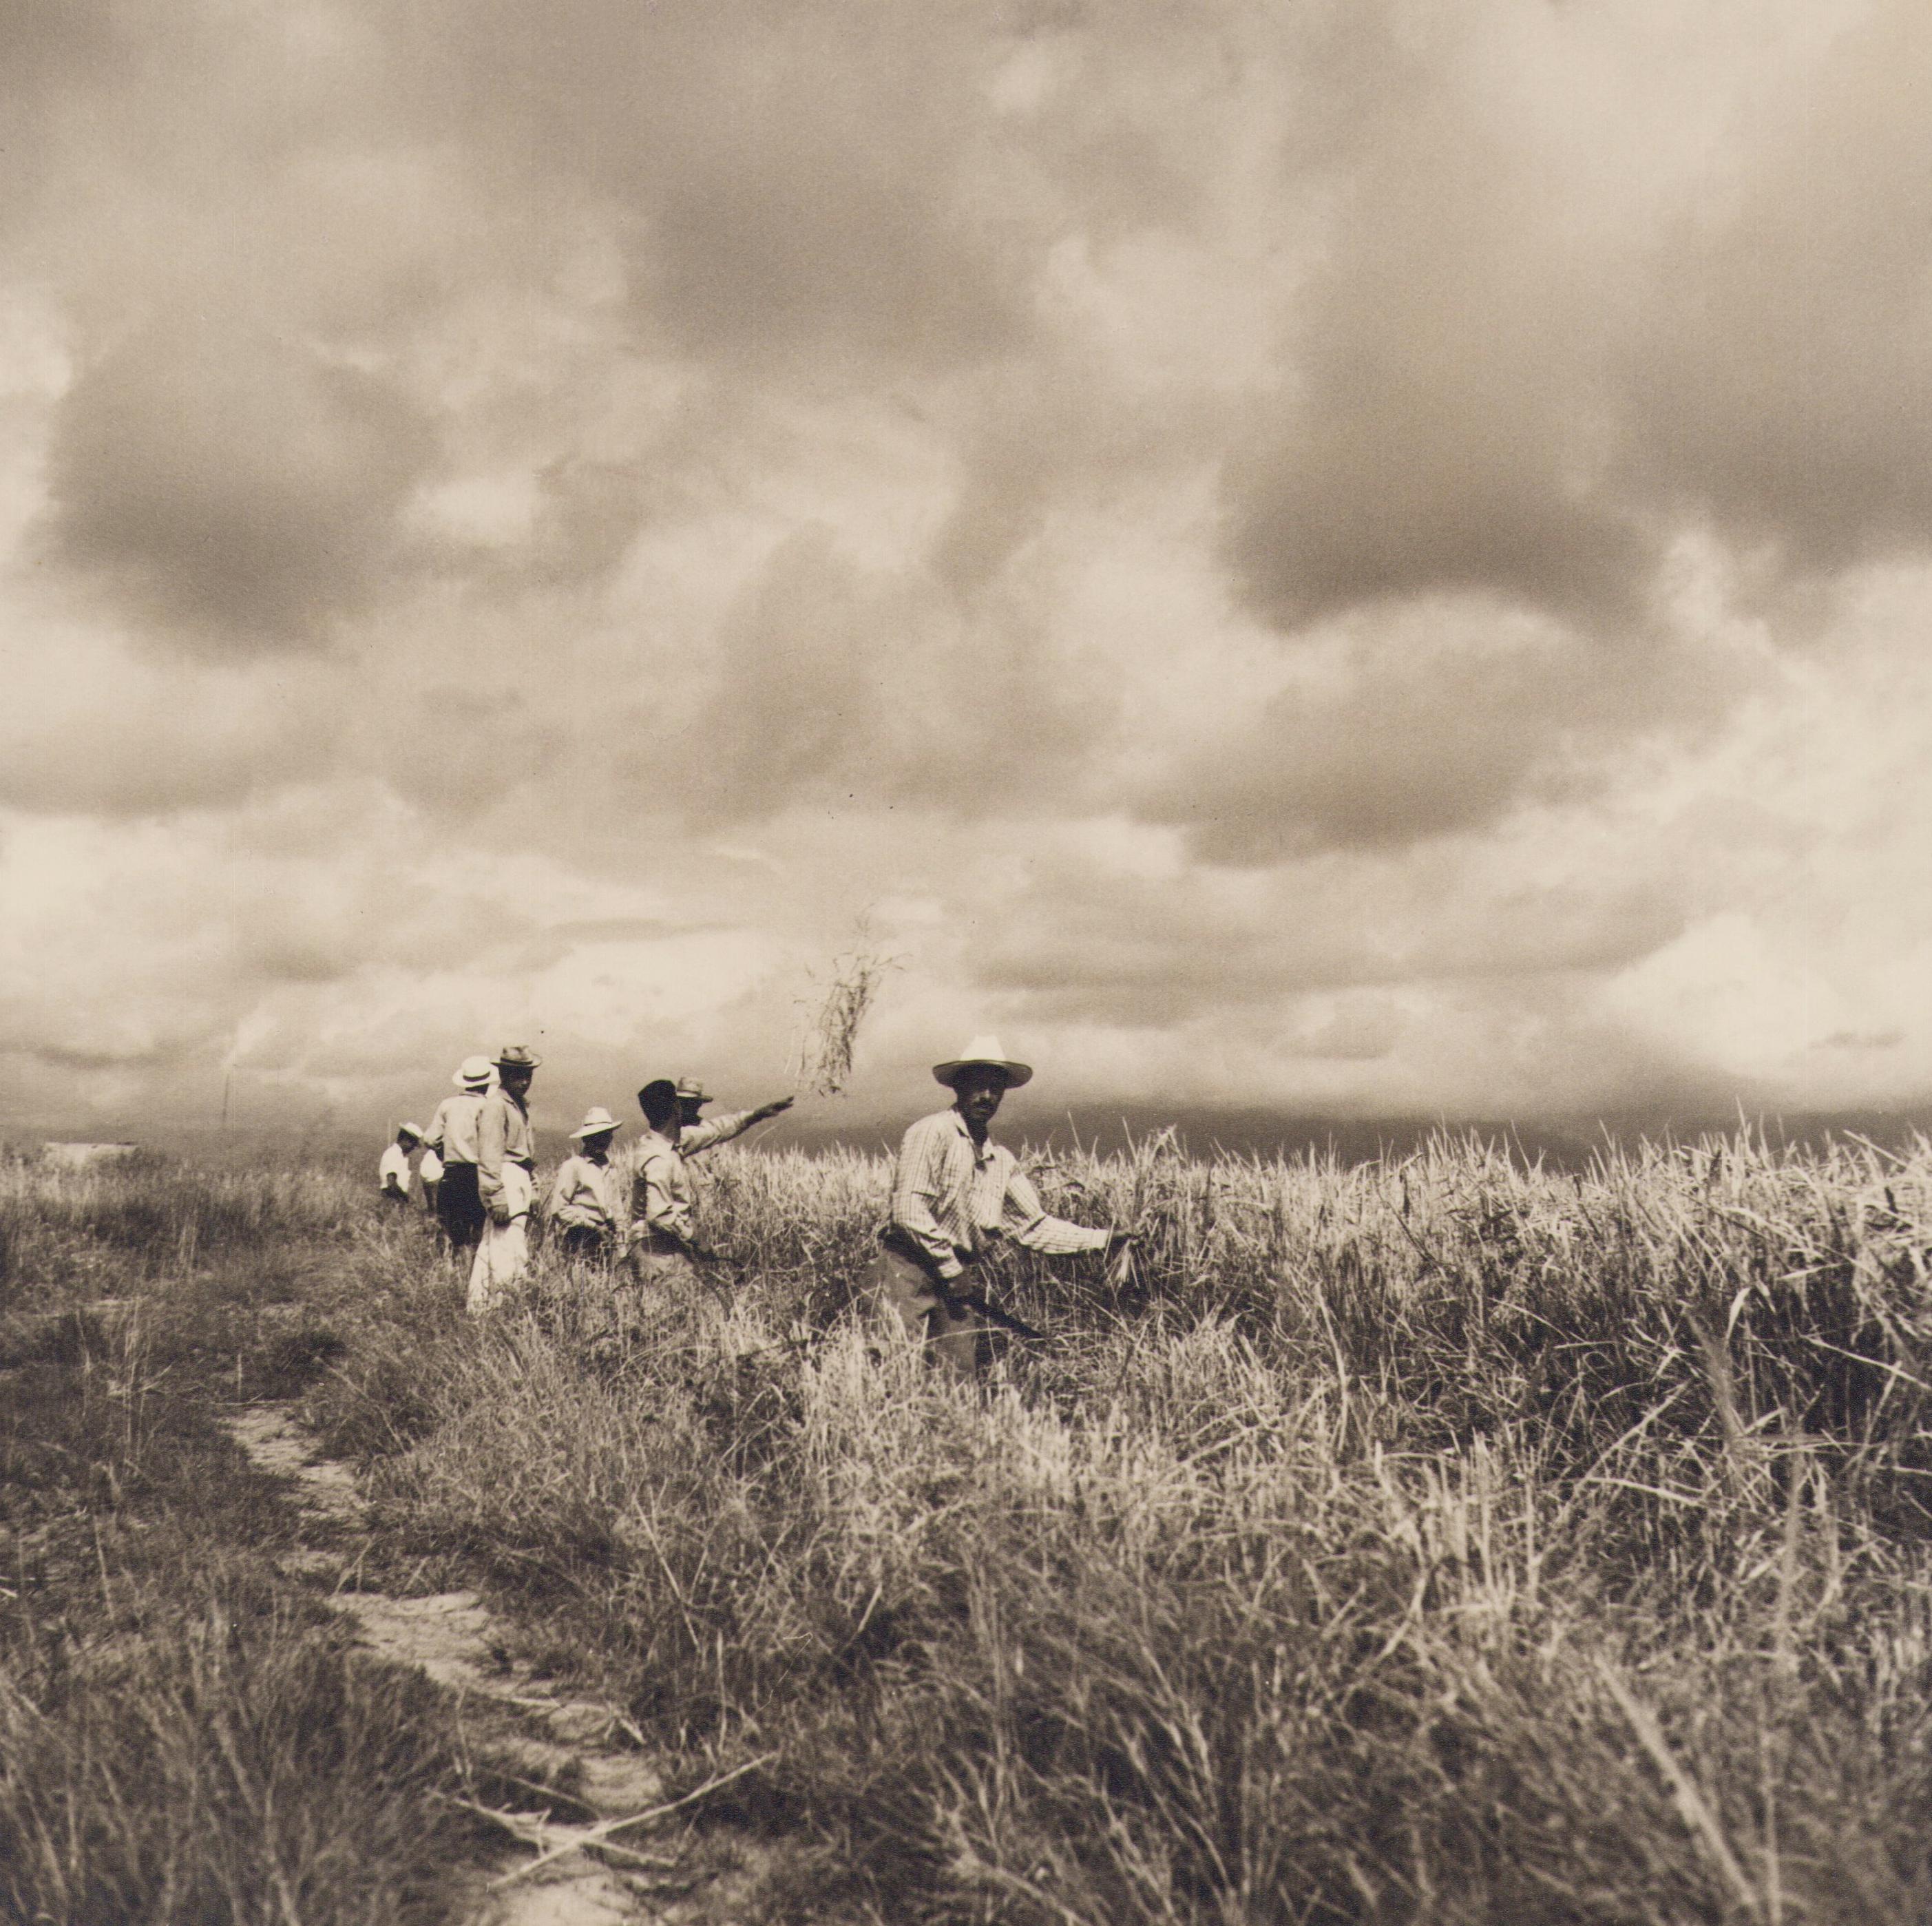 Colombia, Rice, Harvest, Black and White Photography, 1960s, 24, 4 x 24, 2 cm